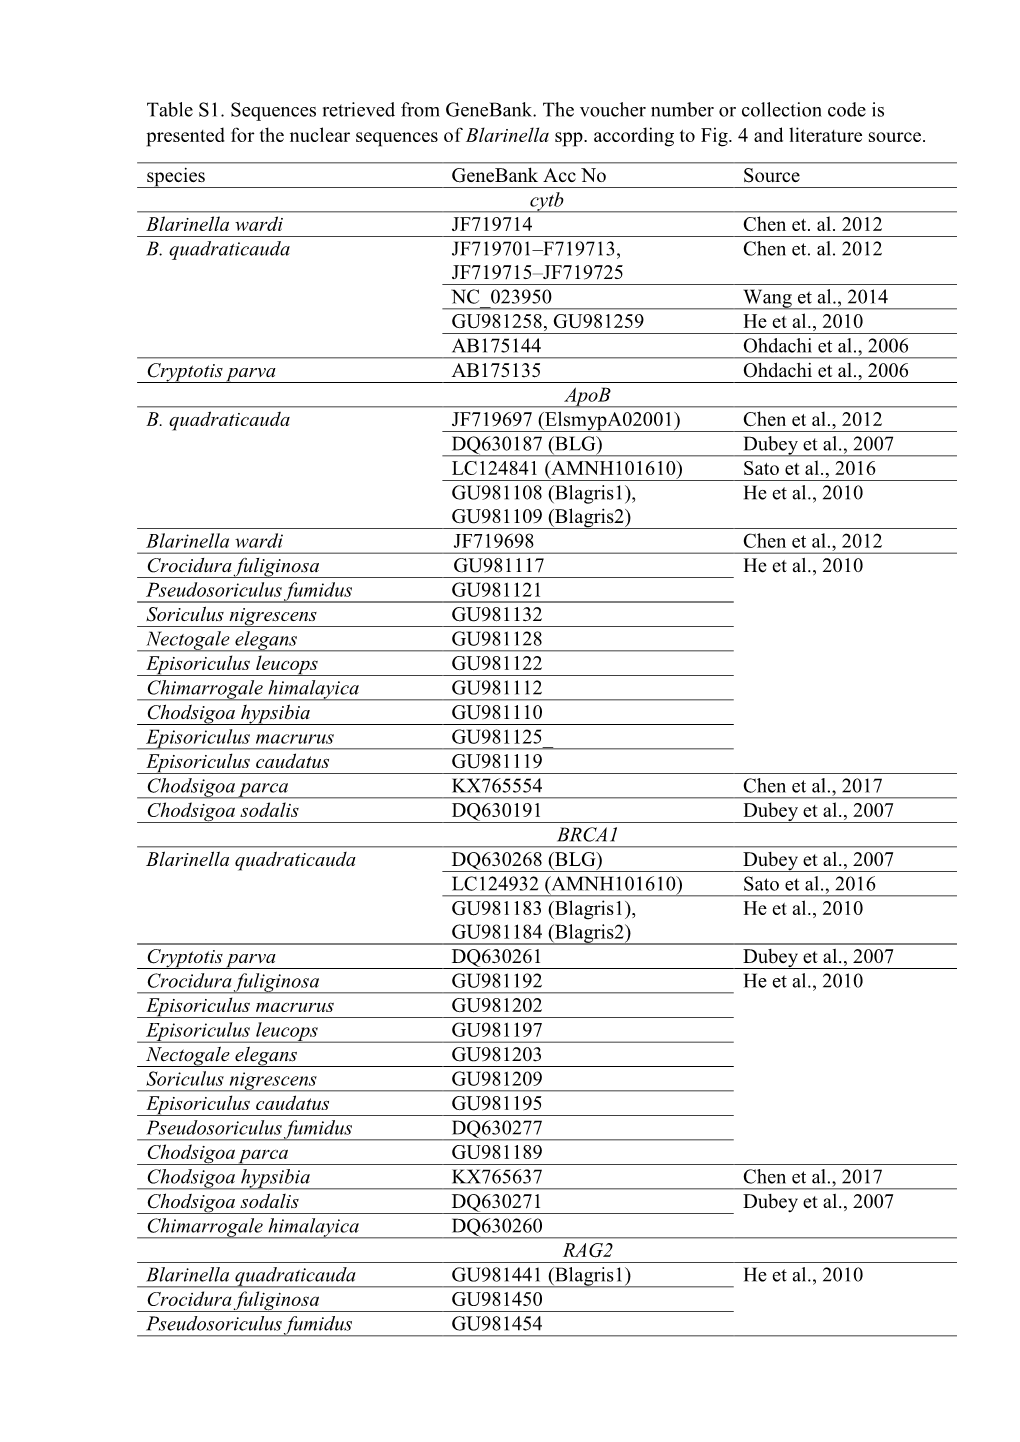 Table S1. Sequences Retrieved from Genebank. the Voucher Number Or Collection Code Is Presented for the Nuclear Sequences of Blarinella Spp